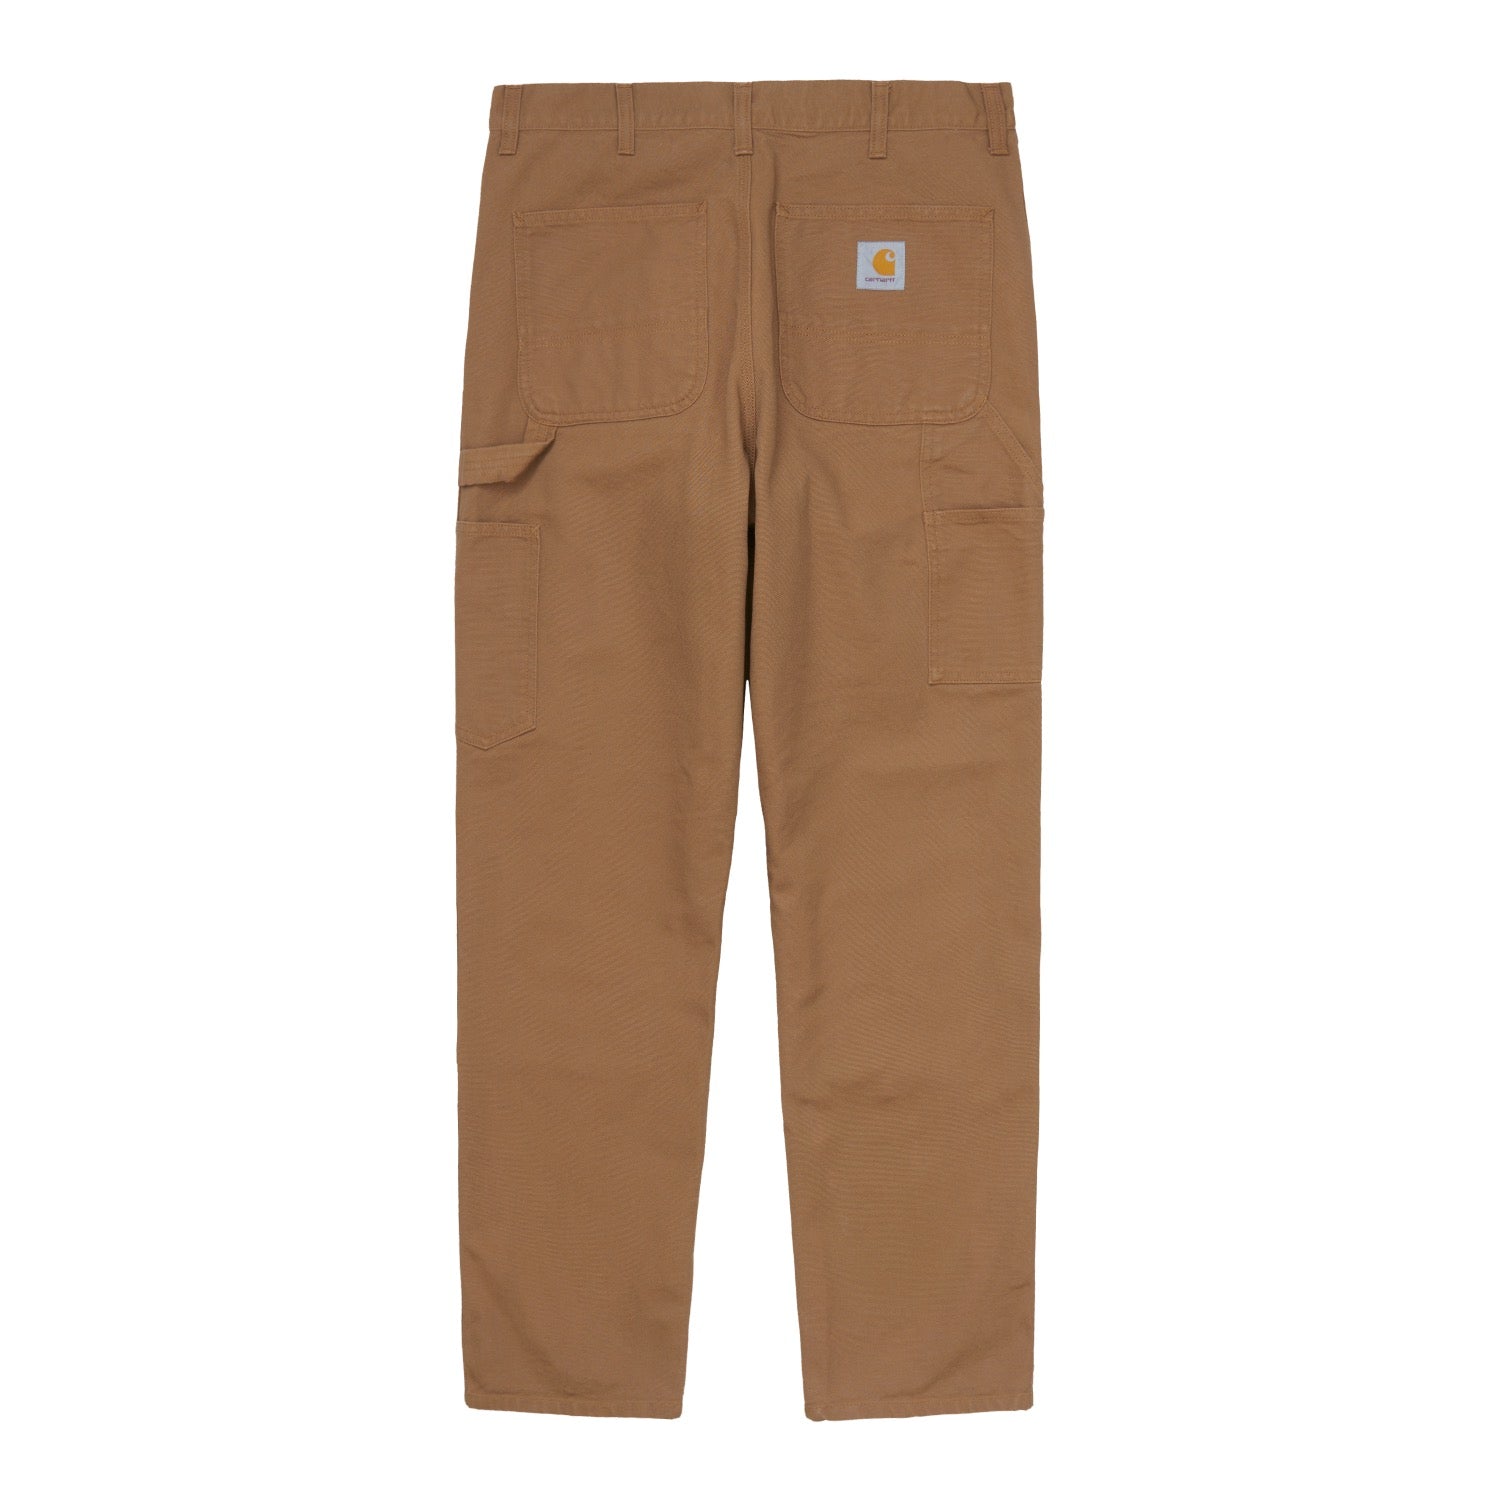 DOUBLE KNEE PANT - Hamilton Brown (rinsed)